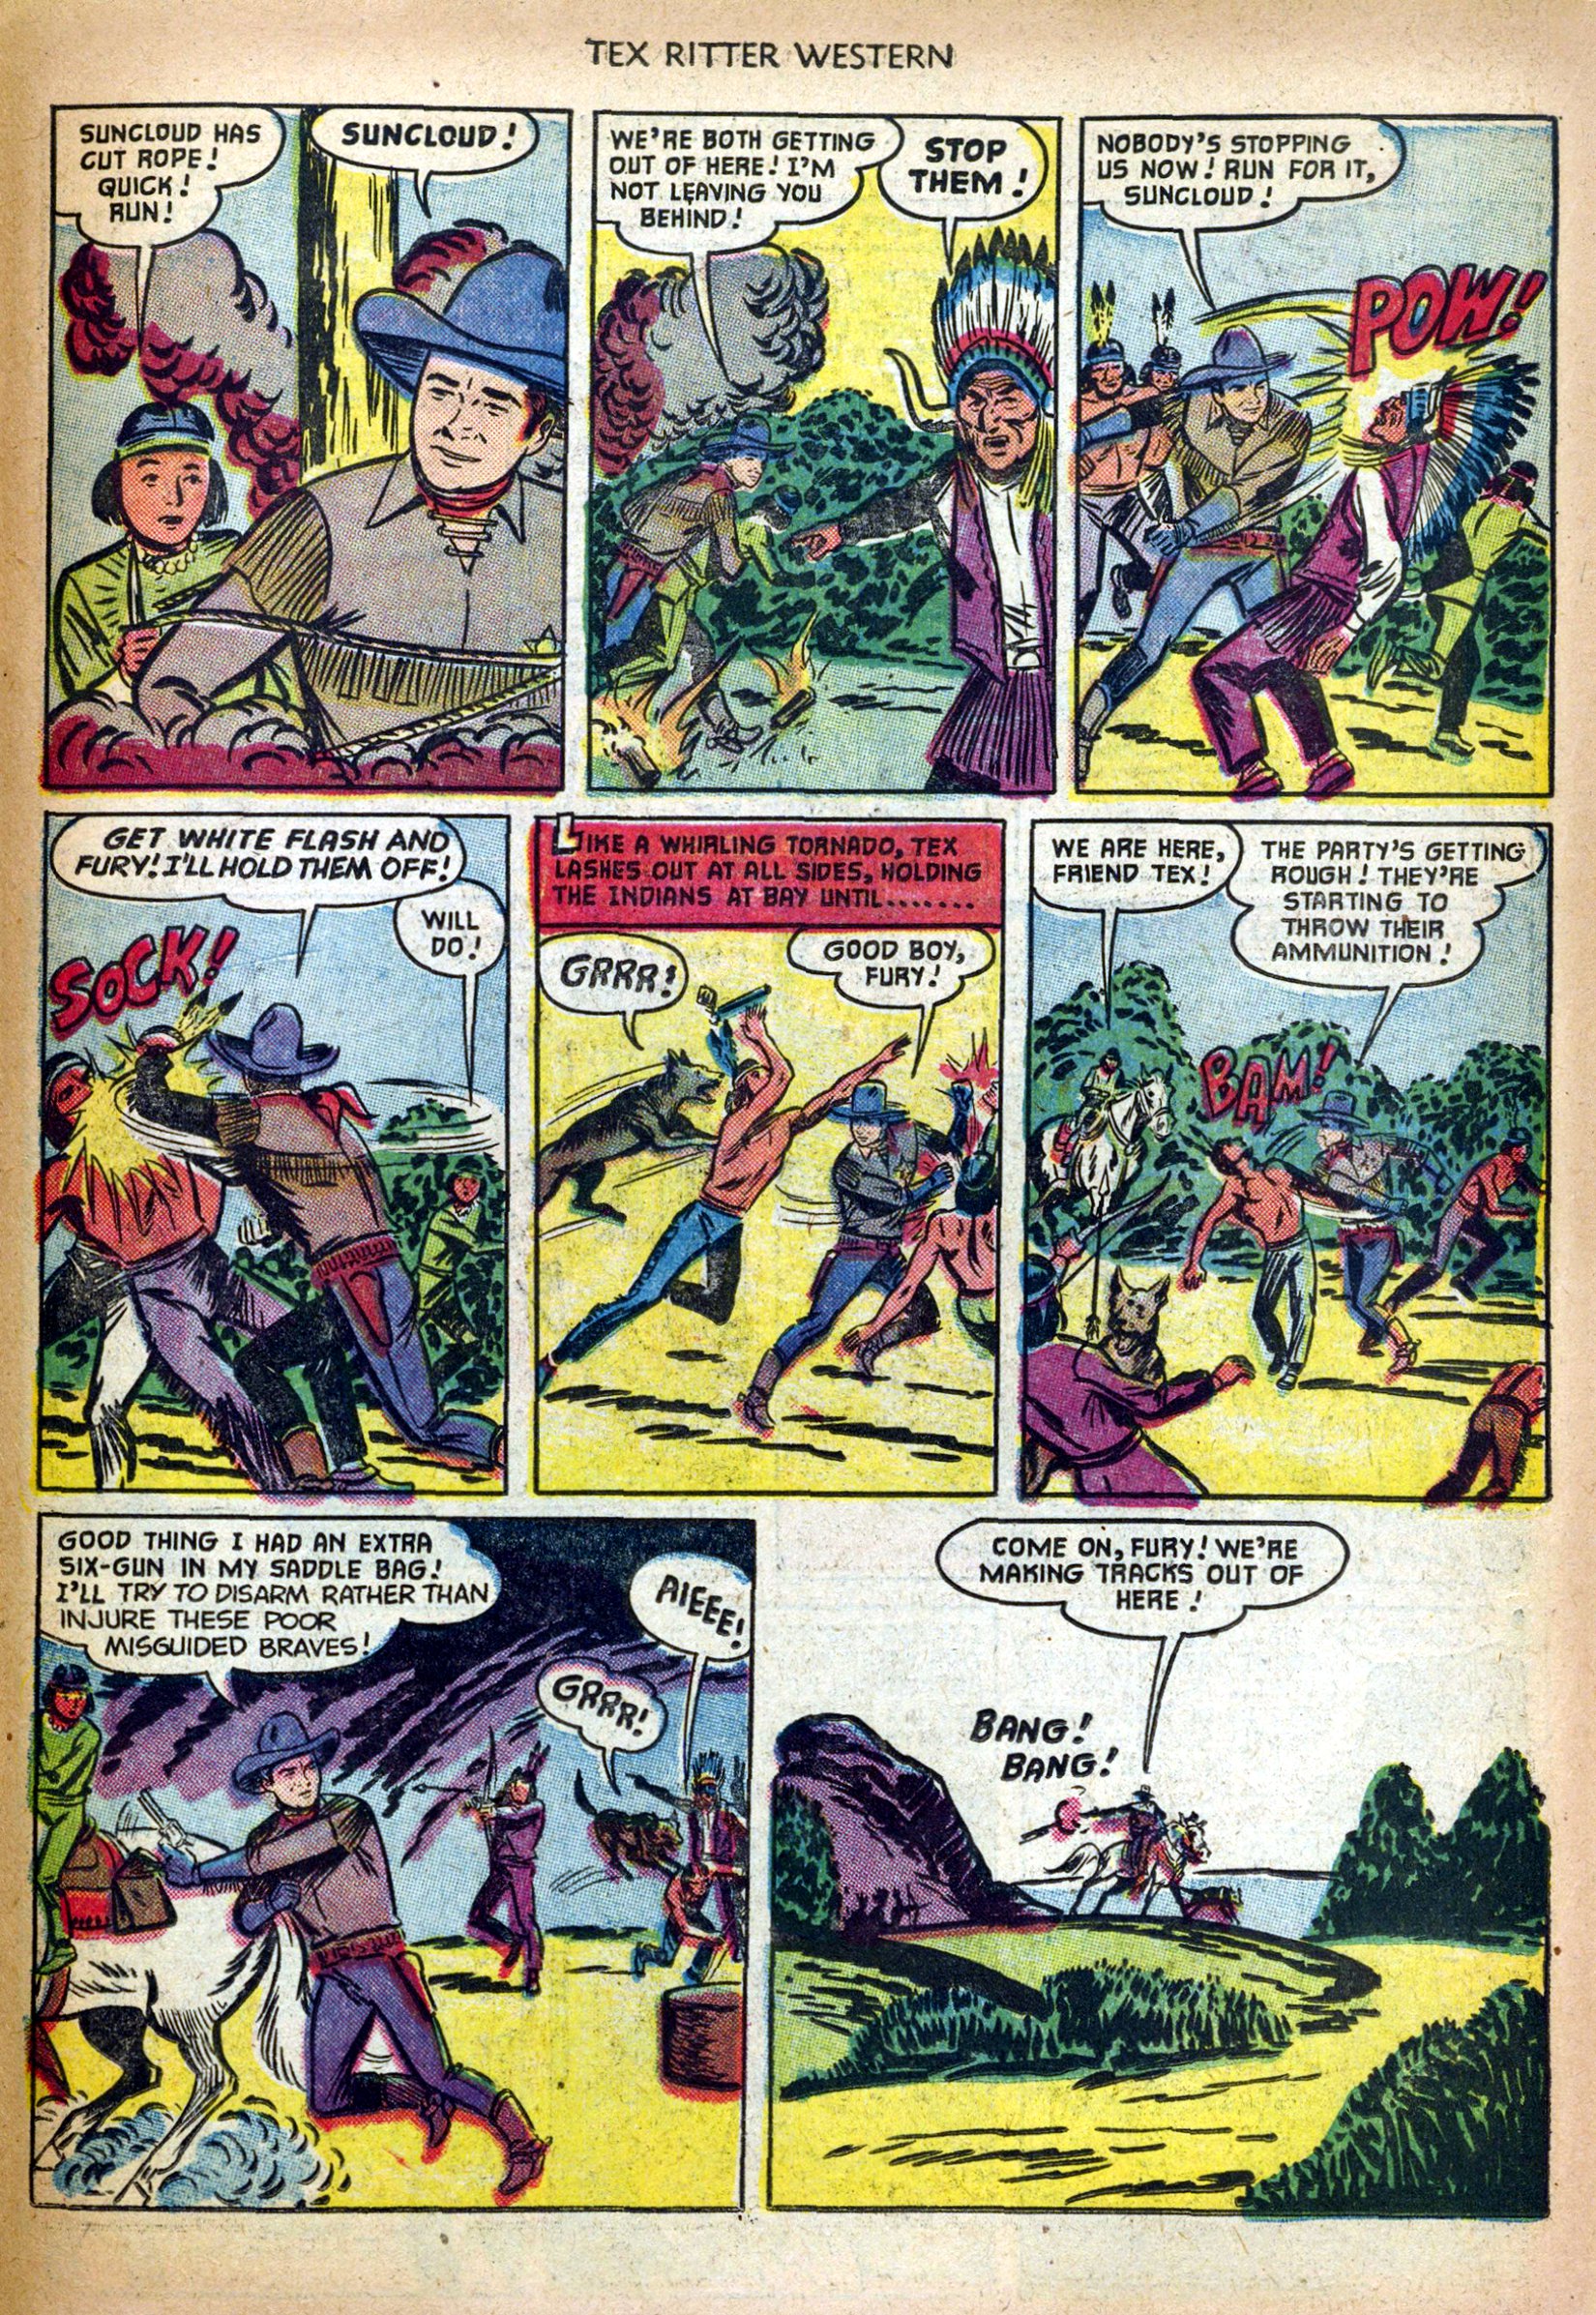 Read online Tex Ritter Western comic -  Issue #10 - 29